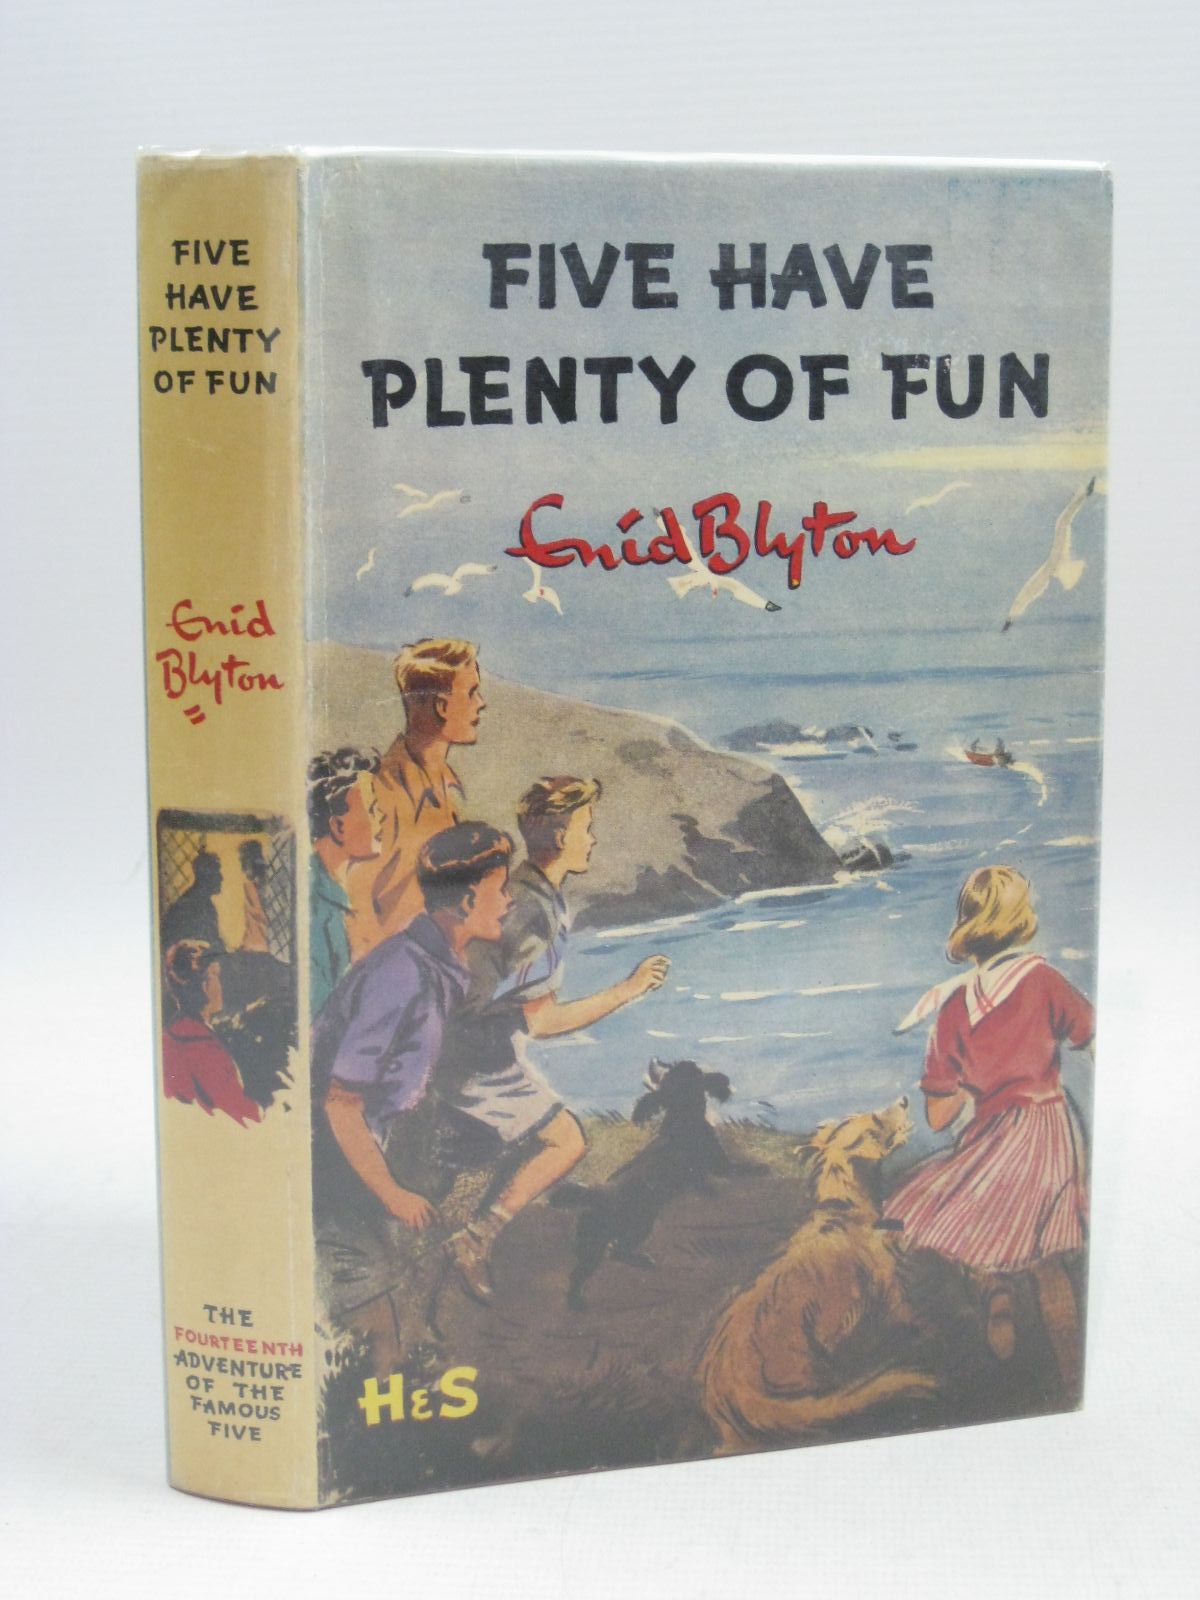 Cover of FIVE HAVE PLENTY OF FUN by Enid Blyton